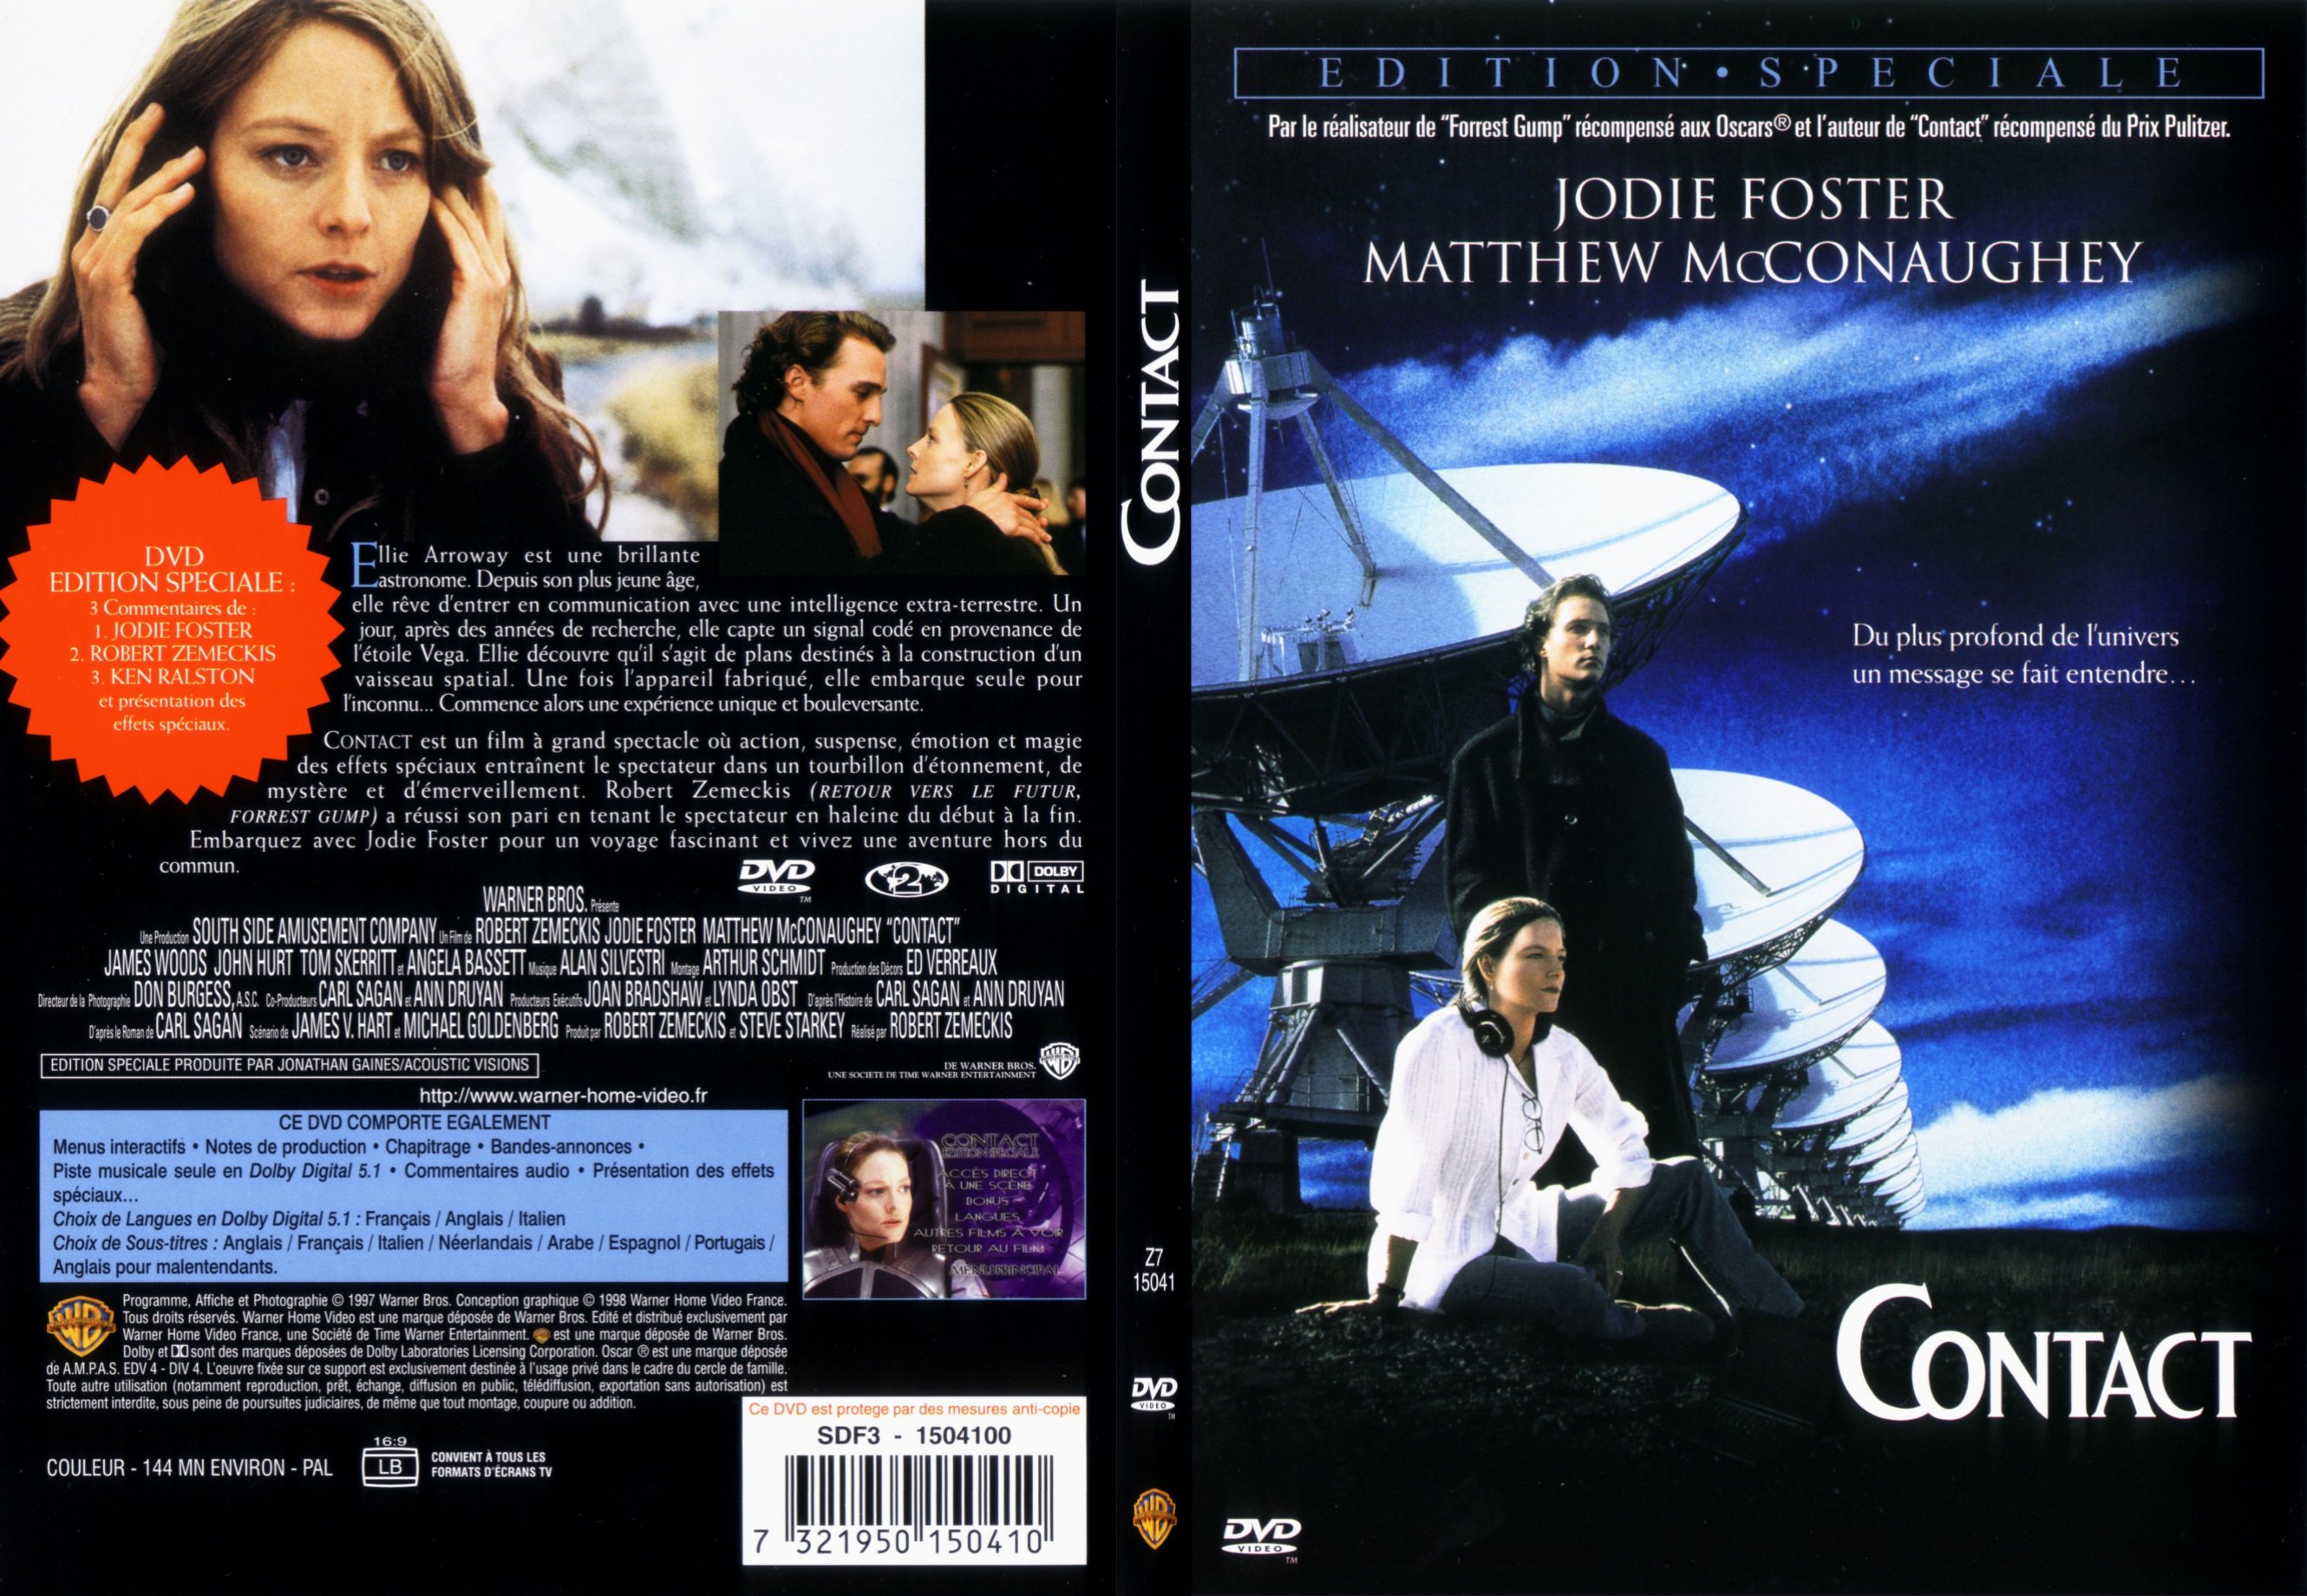 Jaquette DVD Contact - SLIM